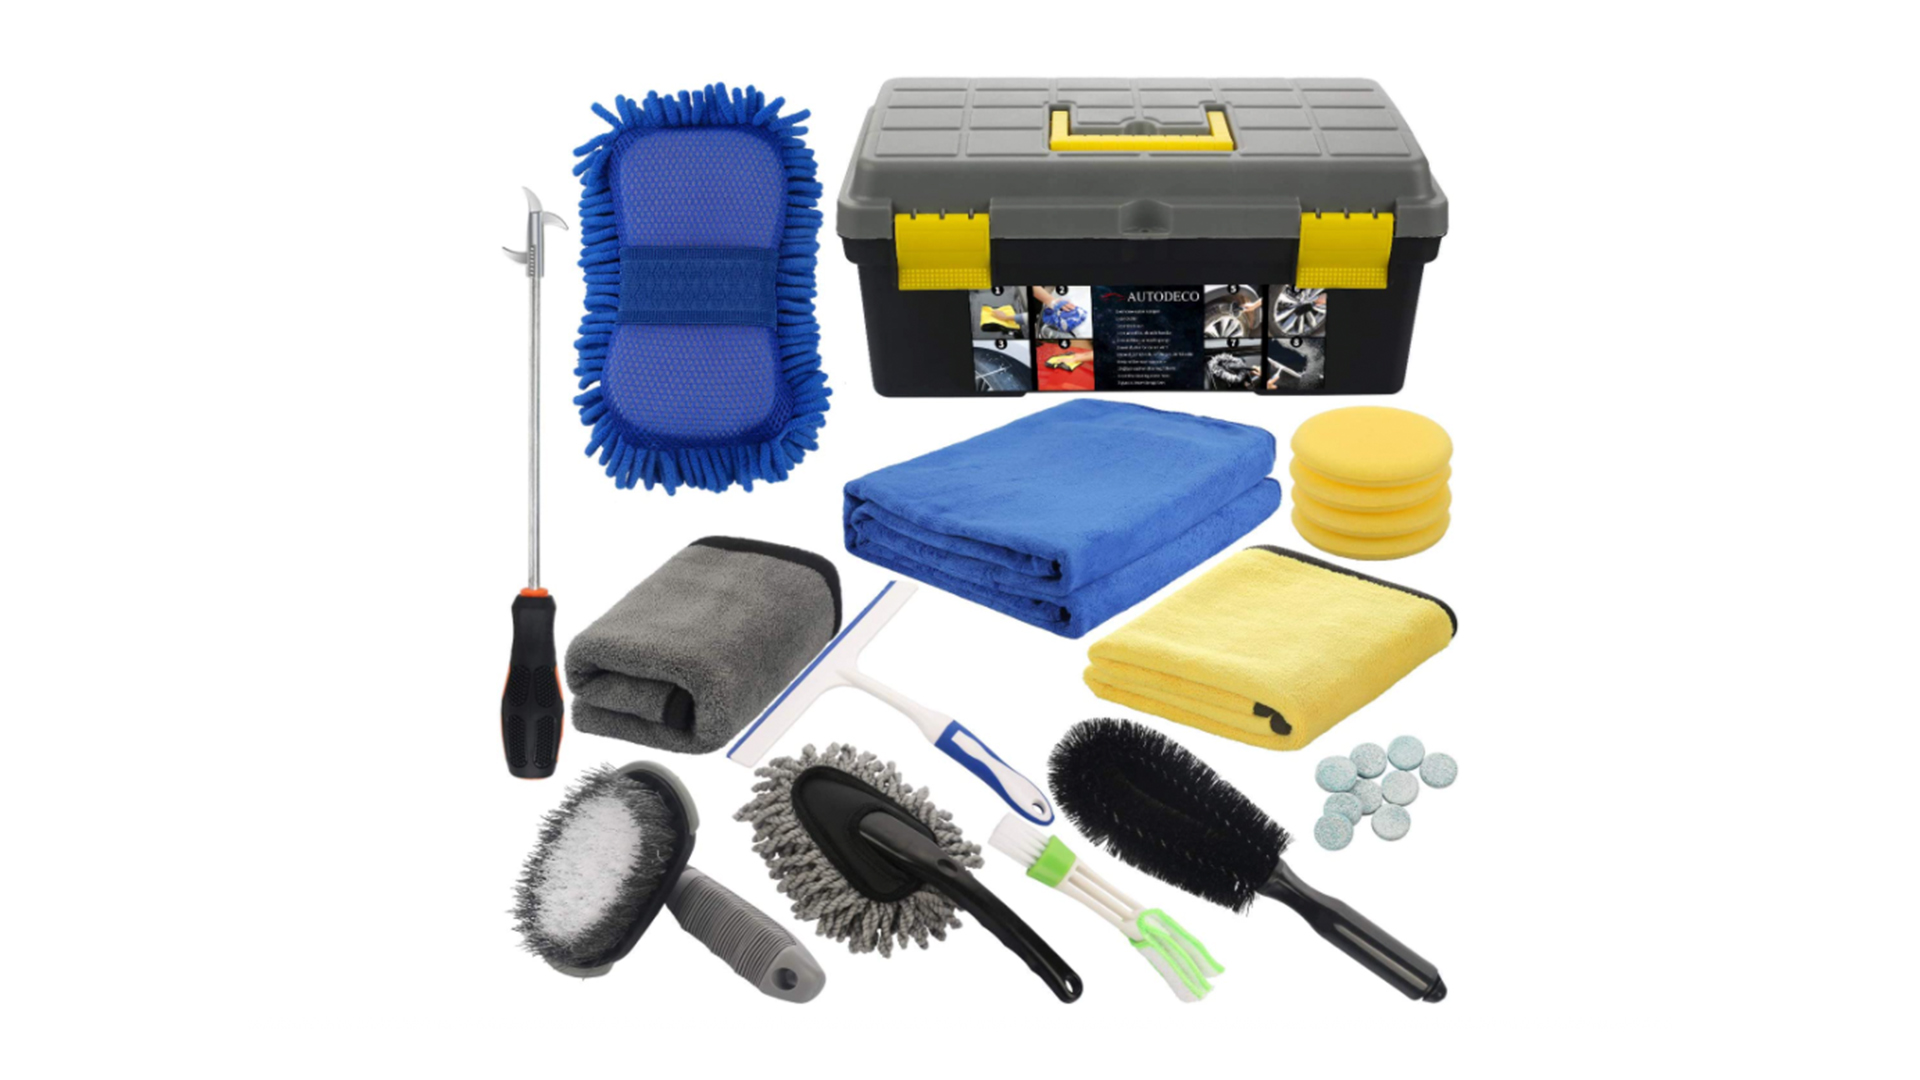 Essential Car Care Kit -12 Piece - Combo of all best selling